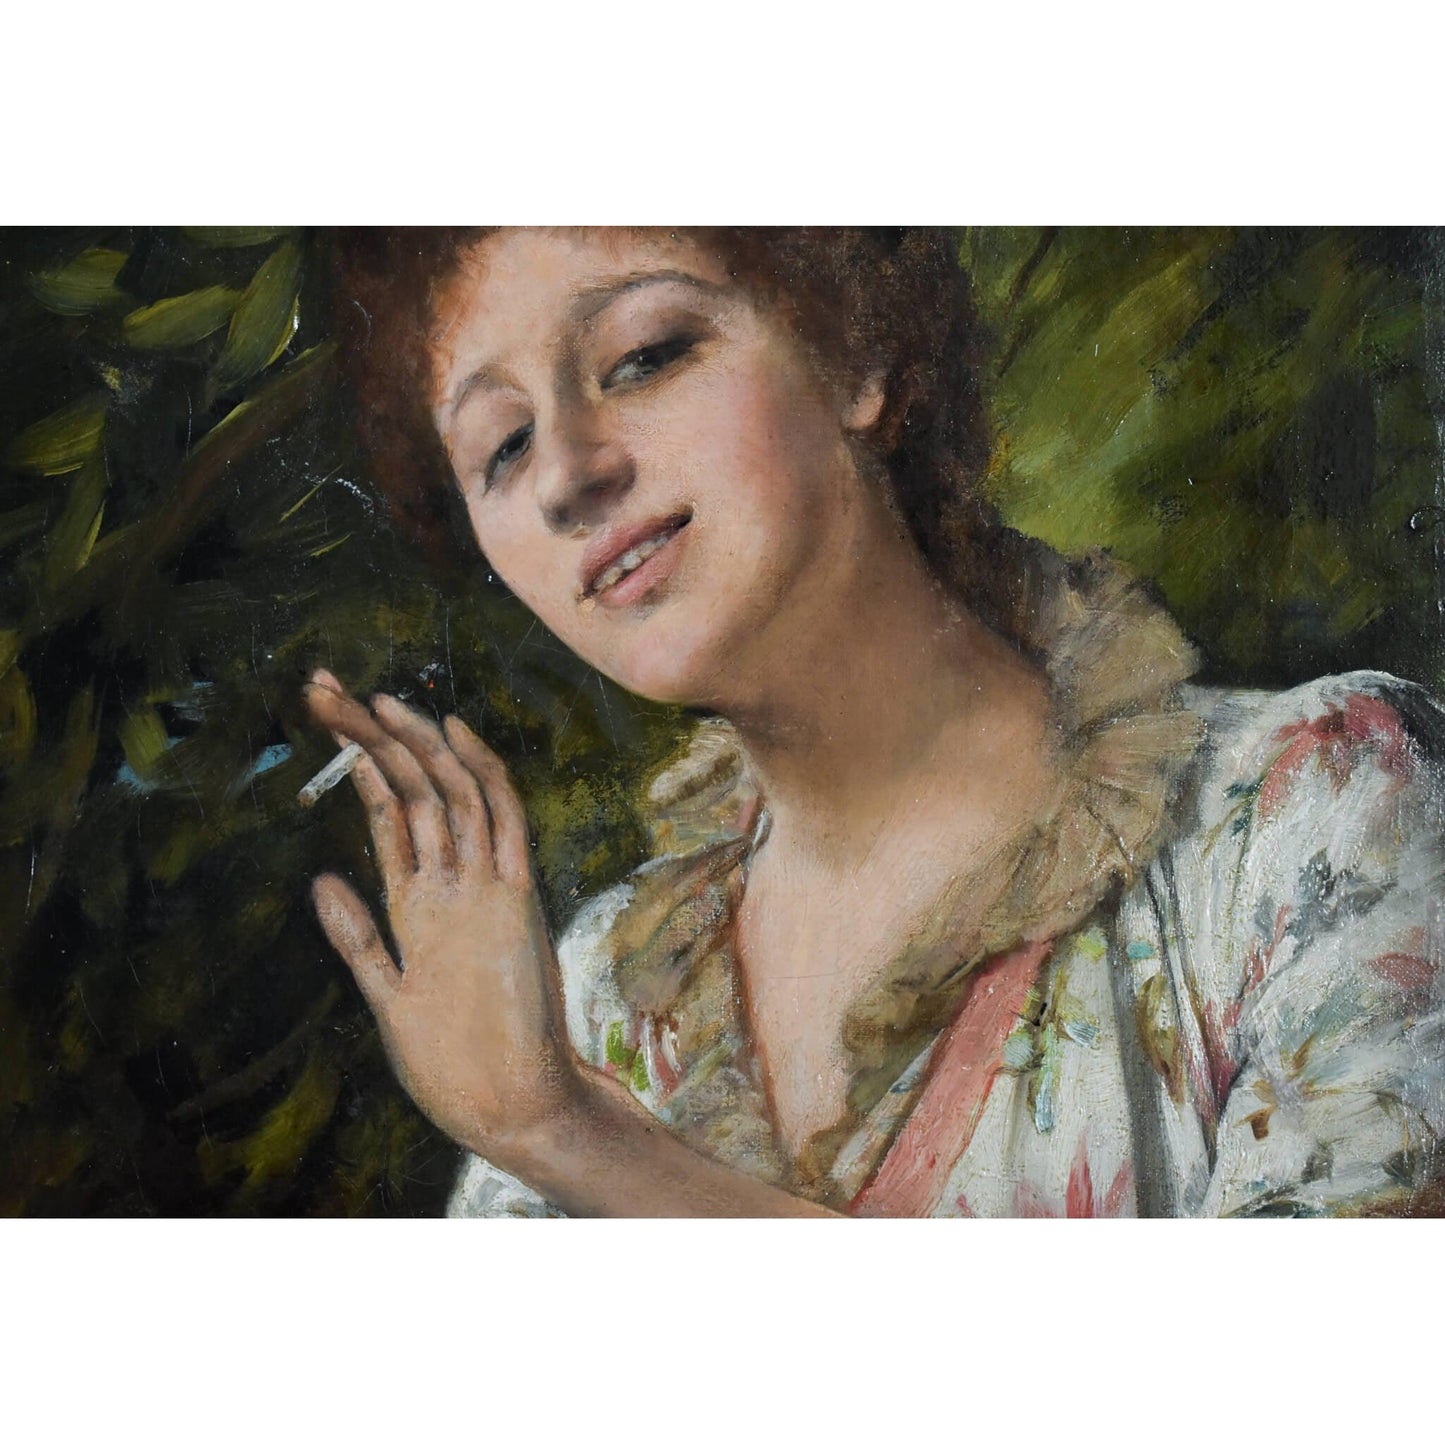 Portrait oil painting young woman smoking original 1887 by British artist Alfred Mendoza for sale at Winckelmann Gallery